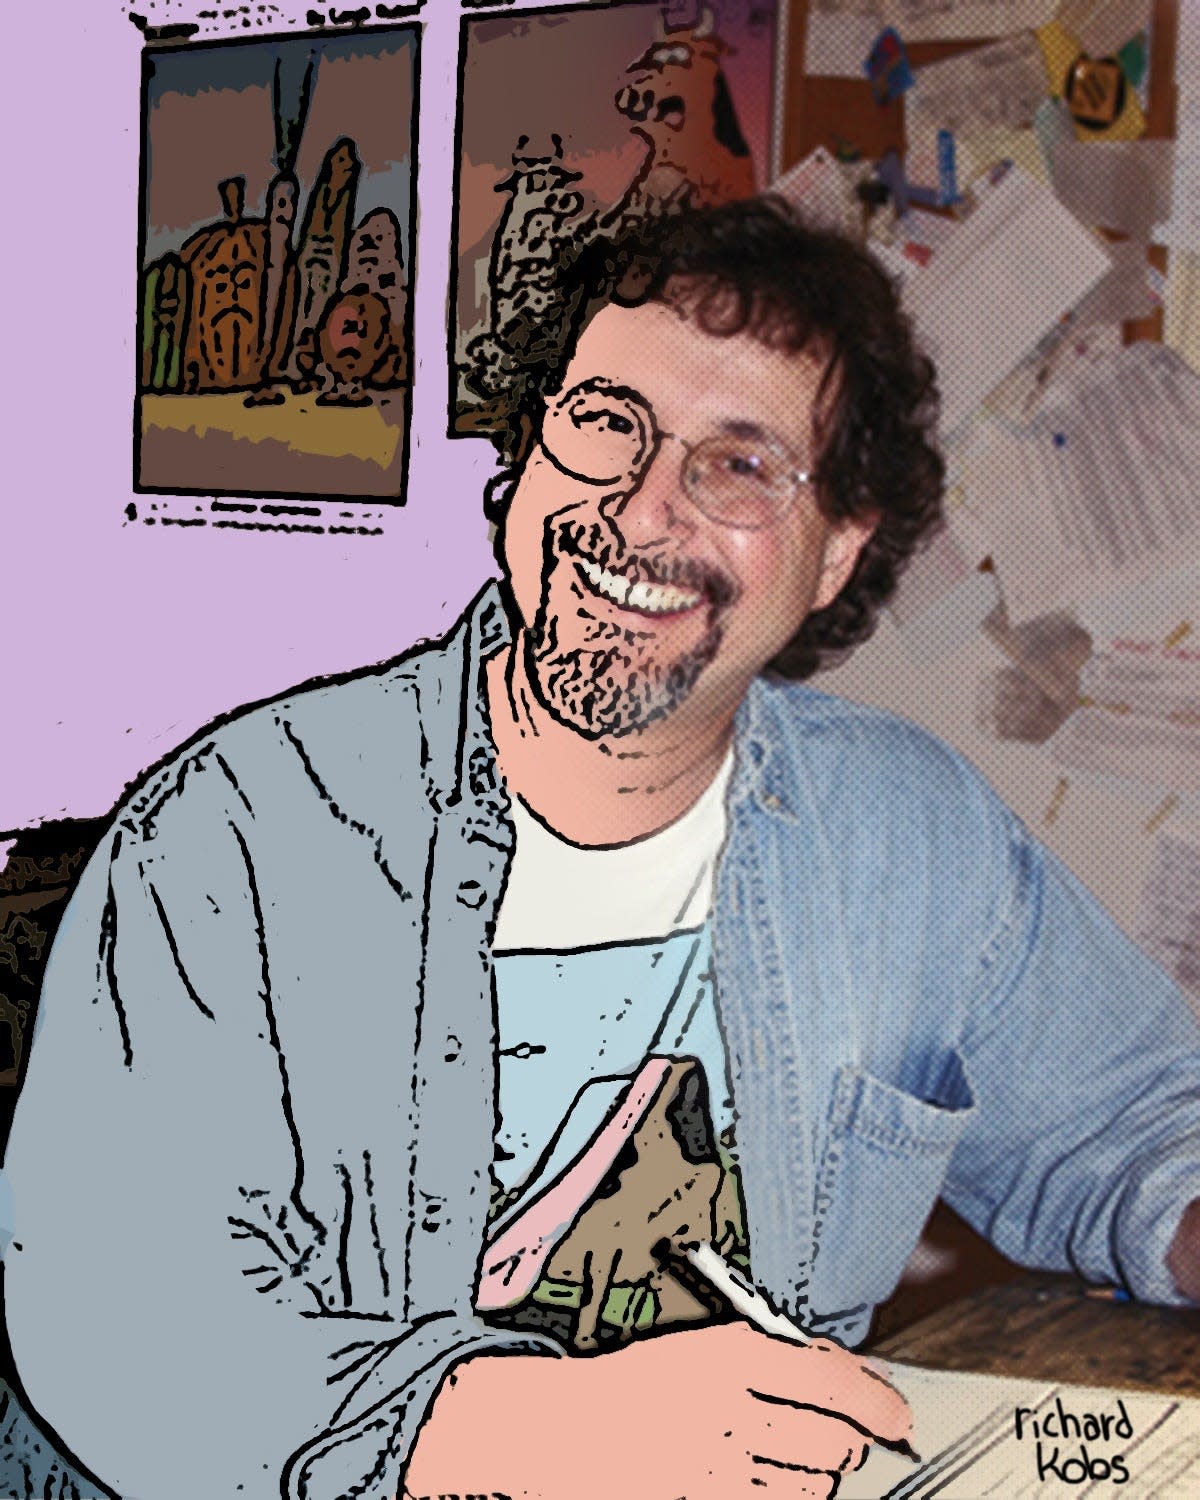 "Rubes" cartoonist Leigh Rubin will give a talk on the power of imagination at 7 p.m. Tuesday, April 19, in the Wegmans Theatre in MAGIC Spell Studios at Rochester Institute of Technology.